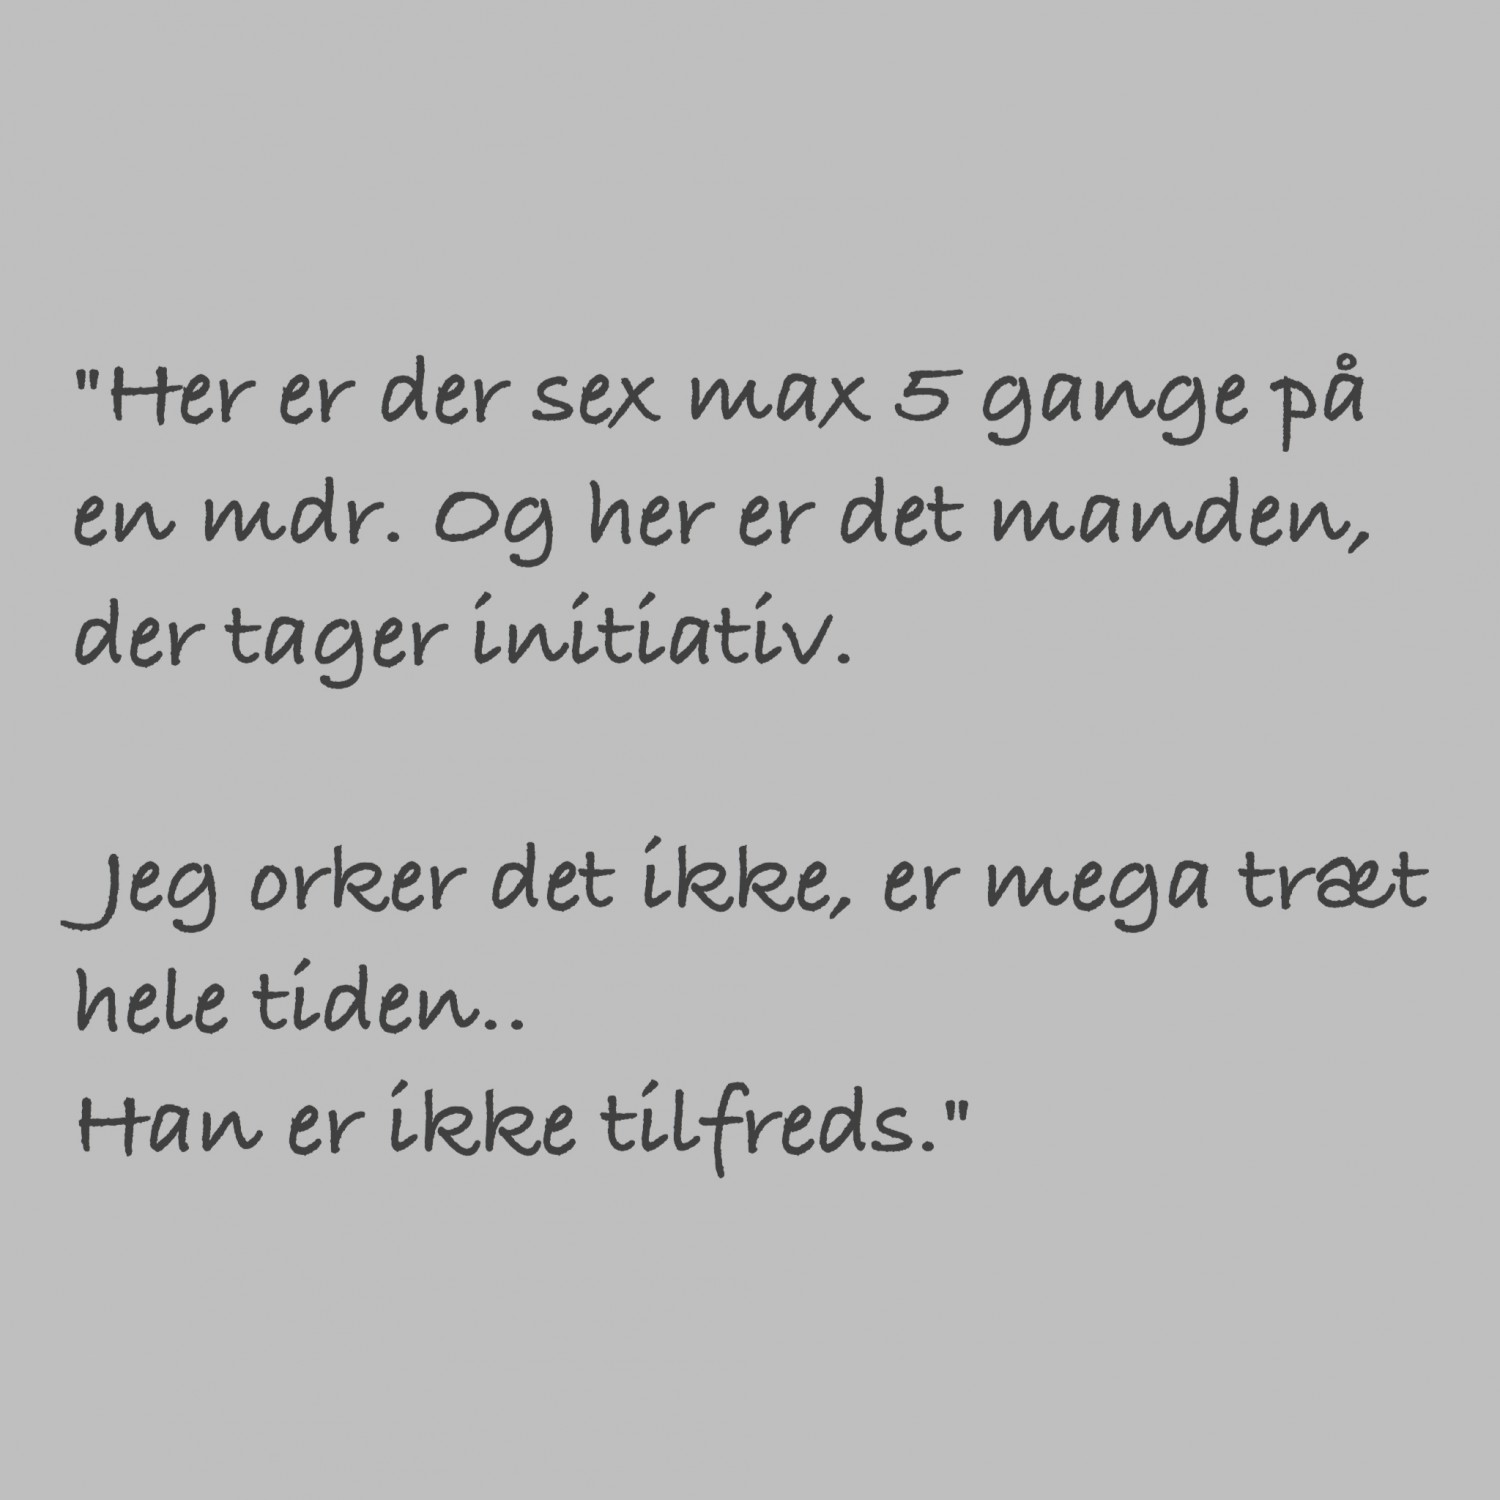 Tror pike by ted hughes theme selv har mening meget 